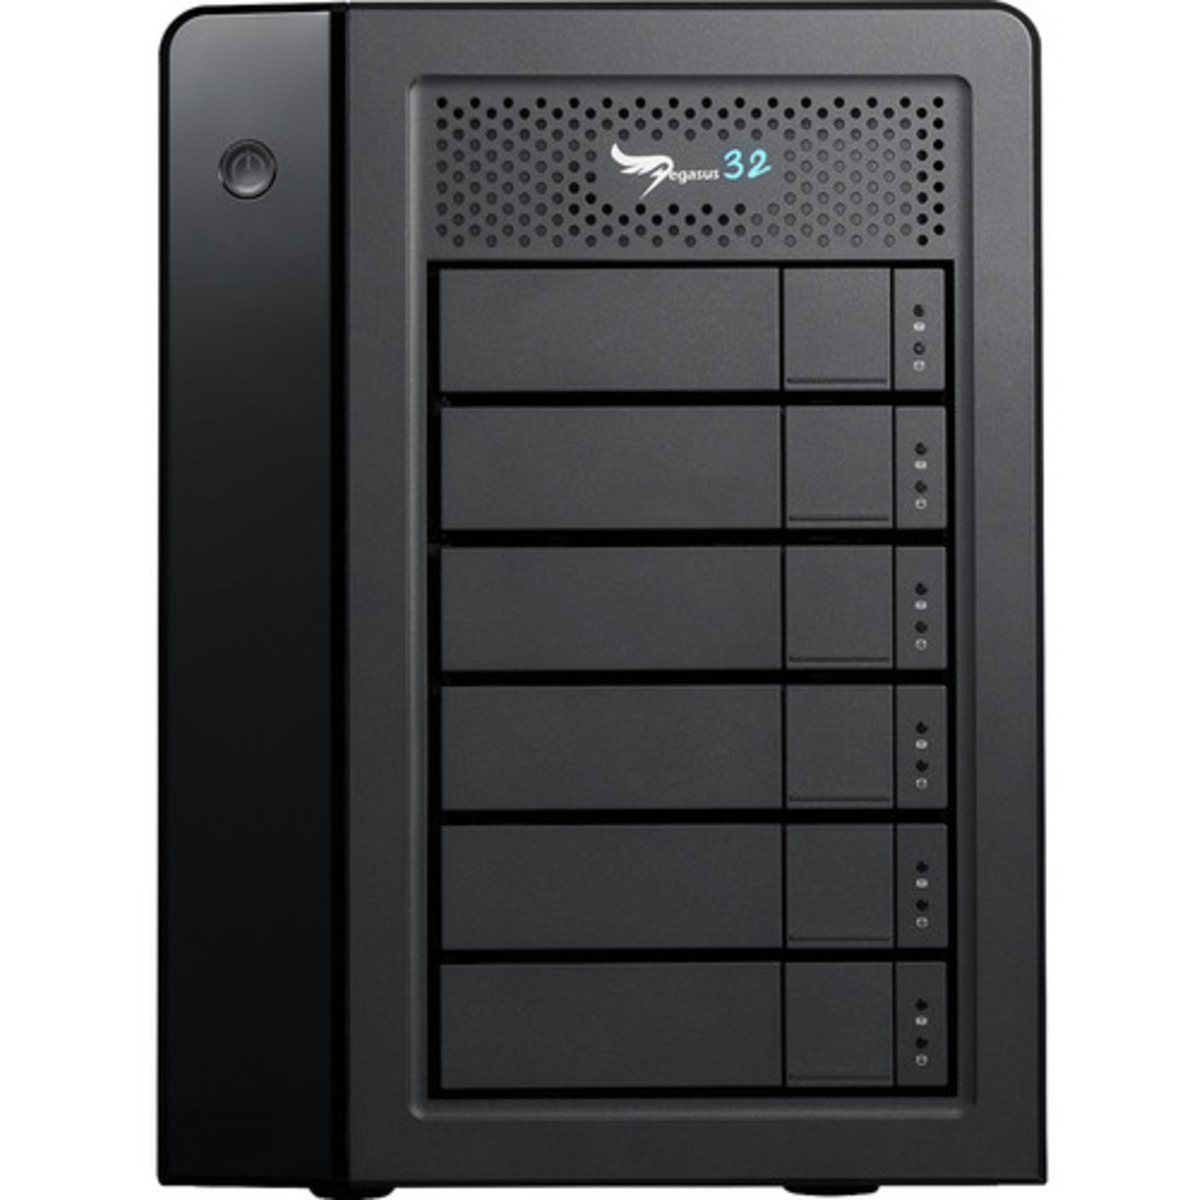 buy $3957 Promise Technology Pegasus32 R6 Thunderbolt 3 48tb Desktop DAS - Direct Attached Storage Device 6x8000gb Toshiba Enterprise Capacity MG08ADA800E 3.5 7200rpm SATA 6Gb/s HDD ENTERPRISE Class Drives Installed - Burn-In Tested - ON SALE - nas headquarters buy network attached storage server device das new raid-5 free shipping usa christmas new year holiday sale Pegasus32 R6 Thunderbolt 3